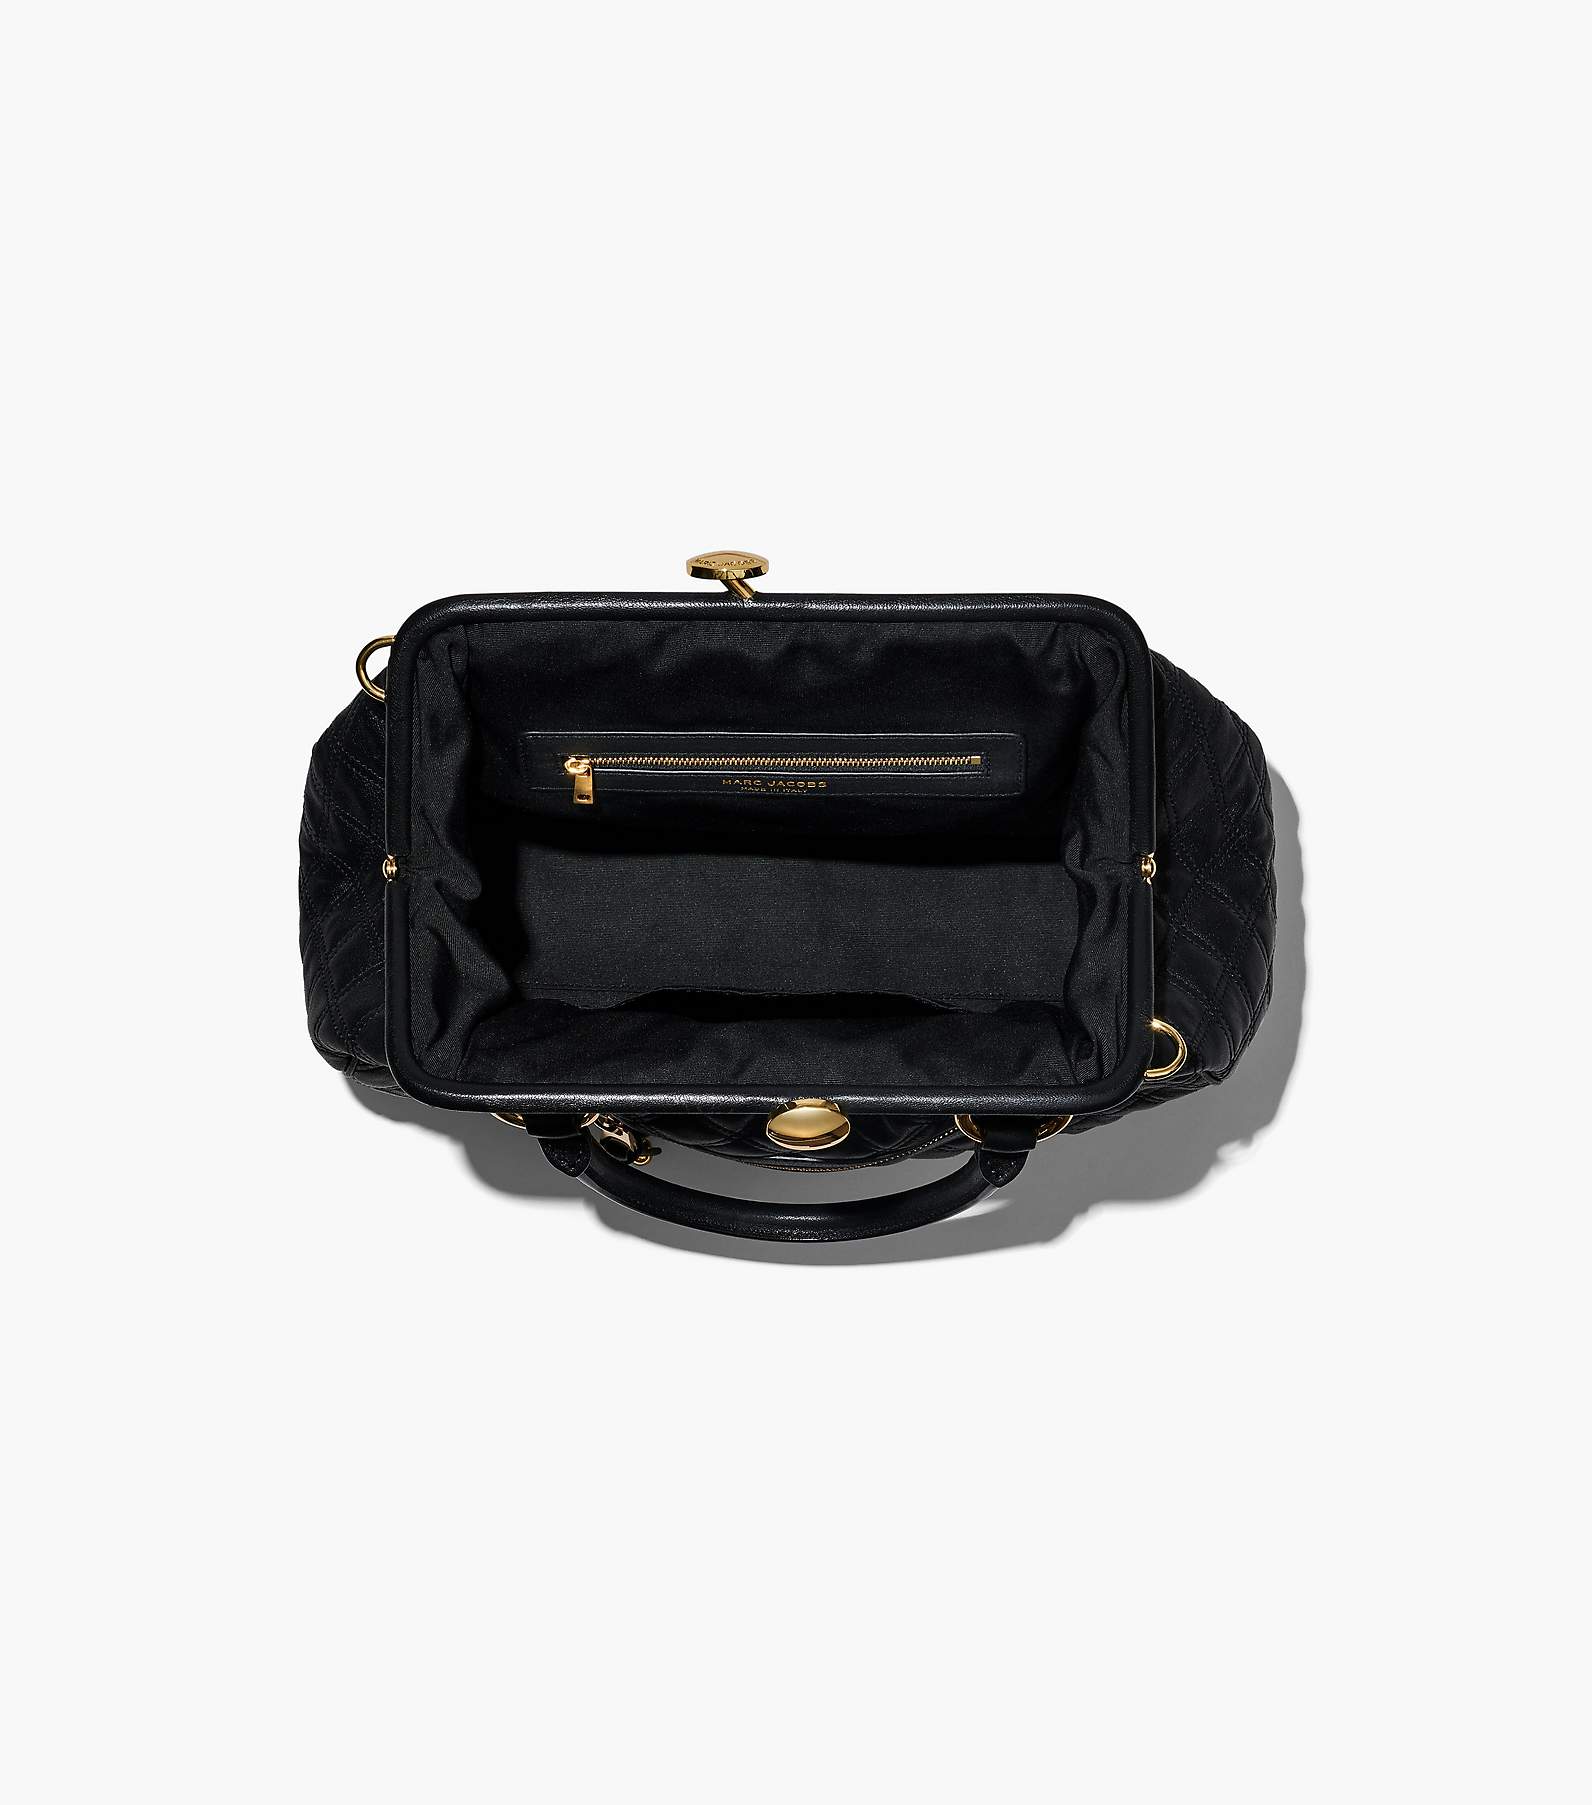 Marc Jacobs Re-Edition Quilted Leather Stam Bag Black